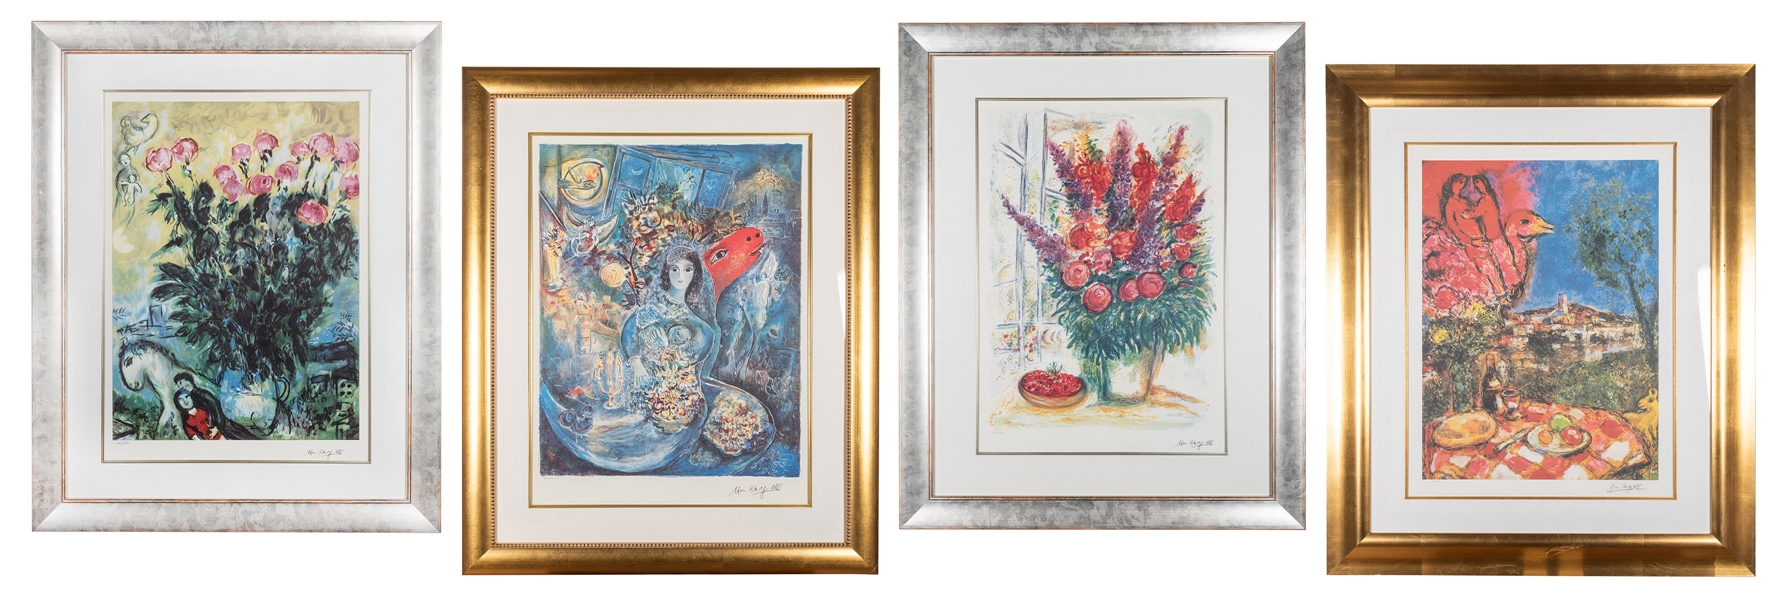  Chagall, Marc (after). Four Limited Edition Chagall Prints....